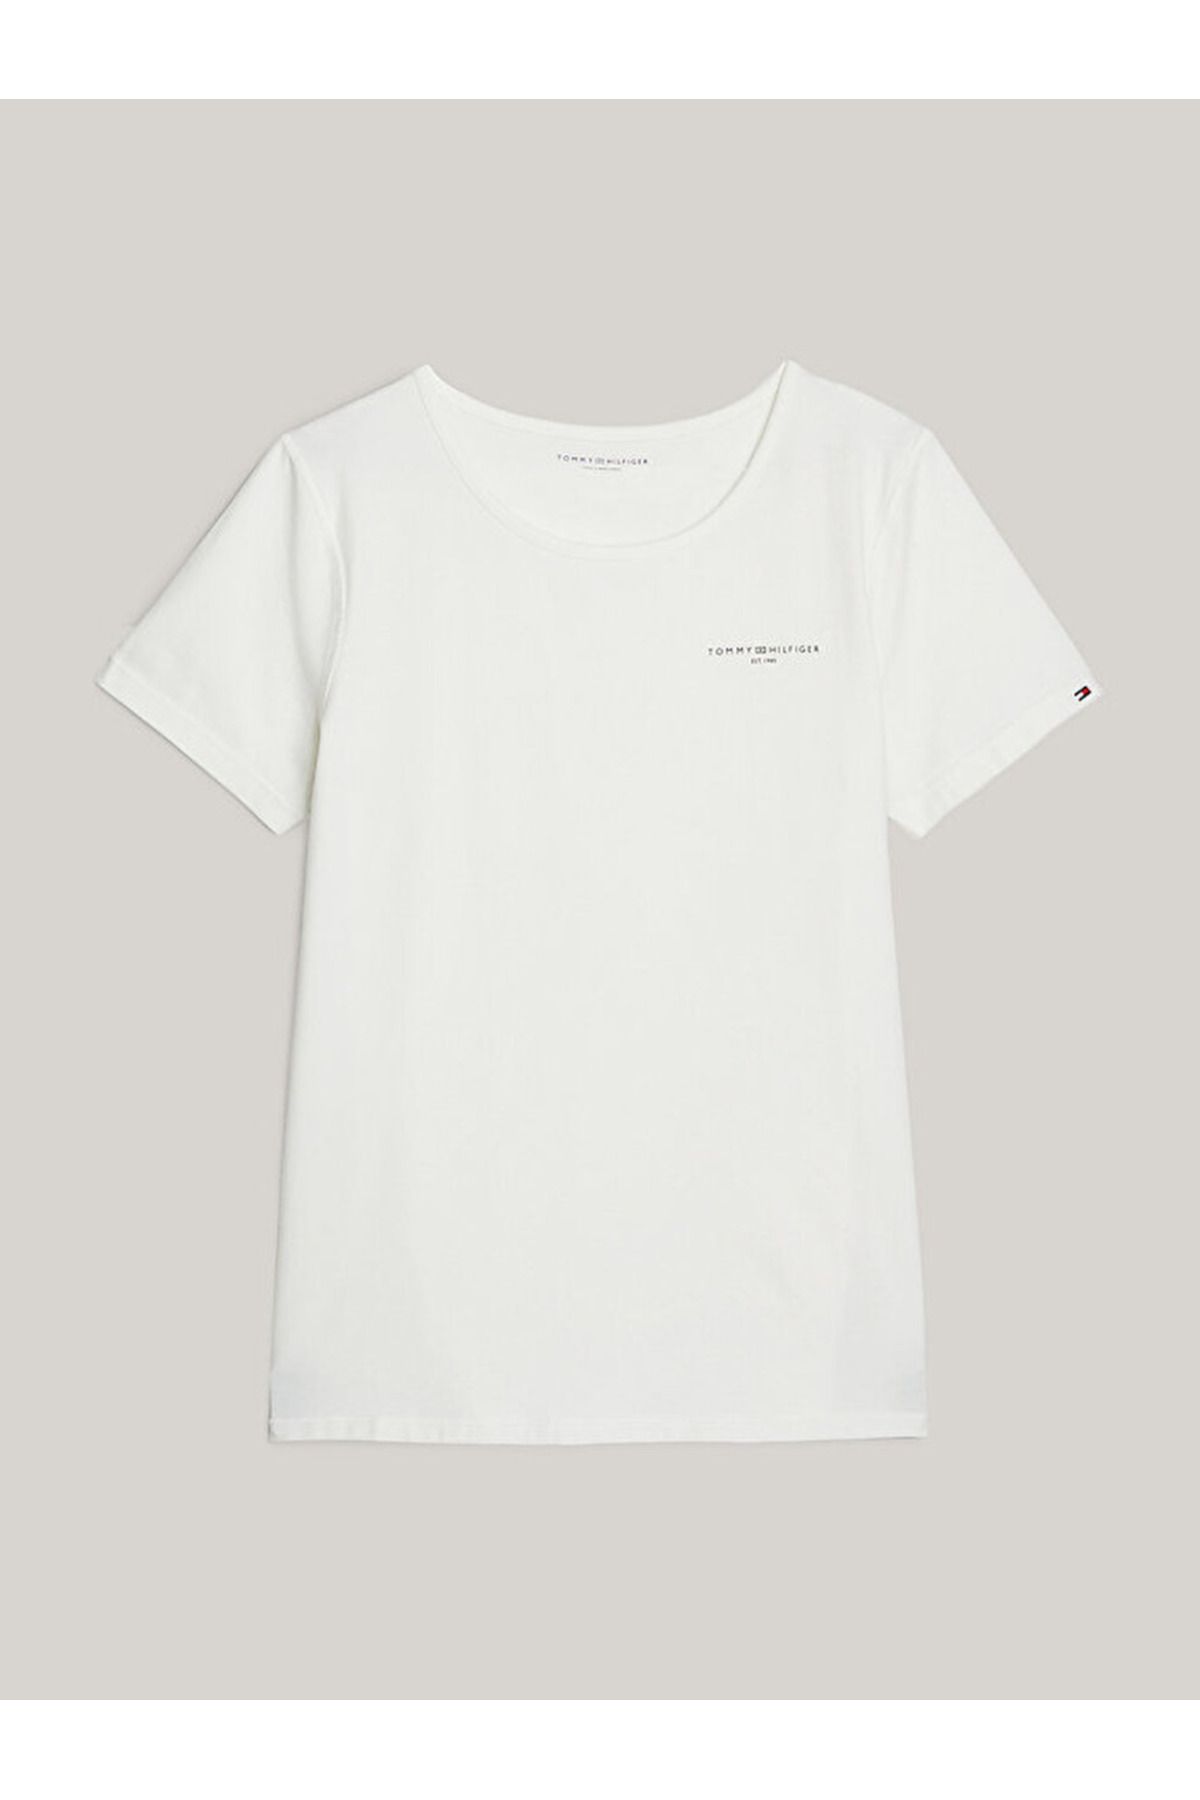 Tommy Hilfiger Adaptive 1985 Collection Signature T-Shirt